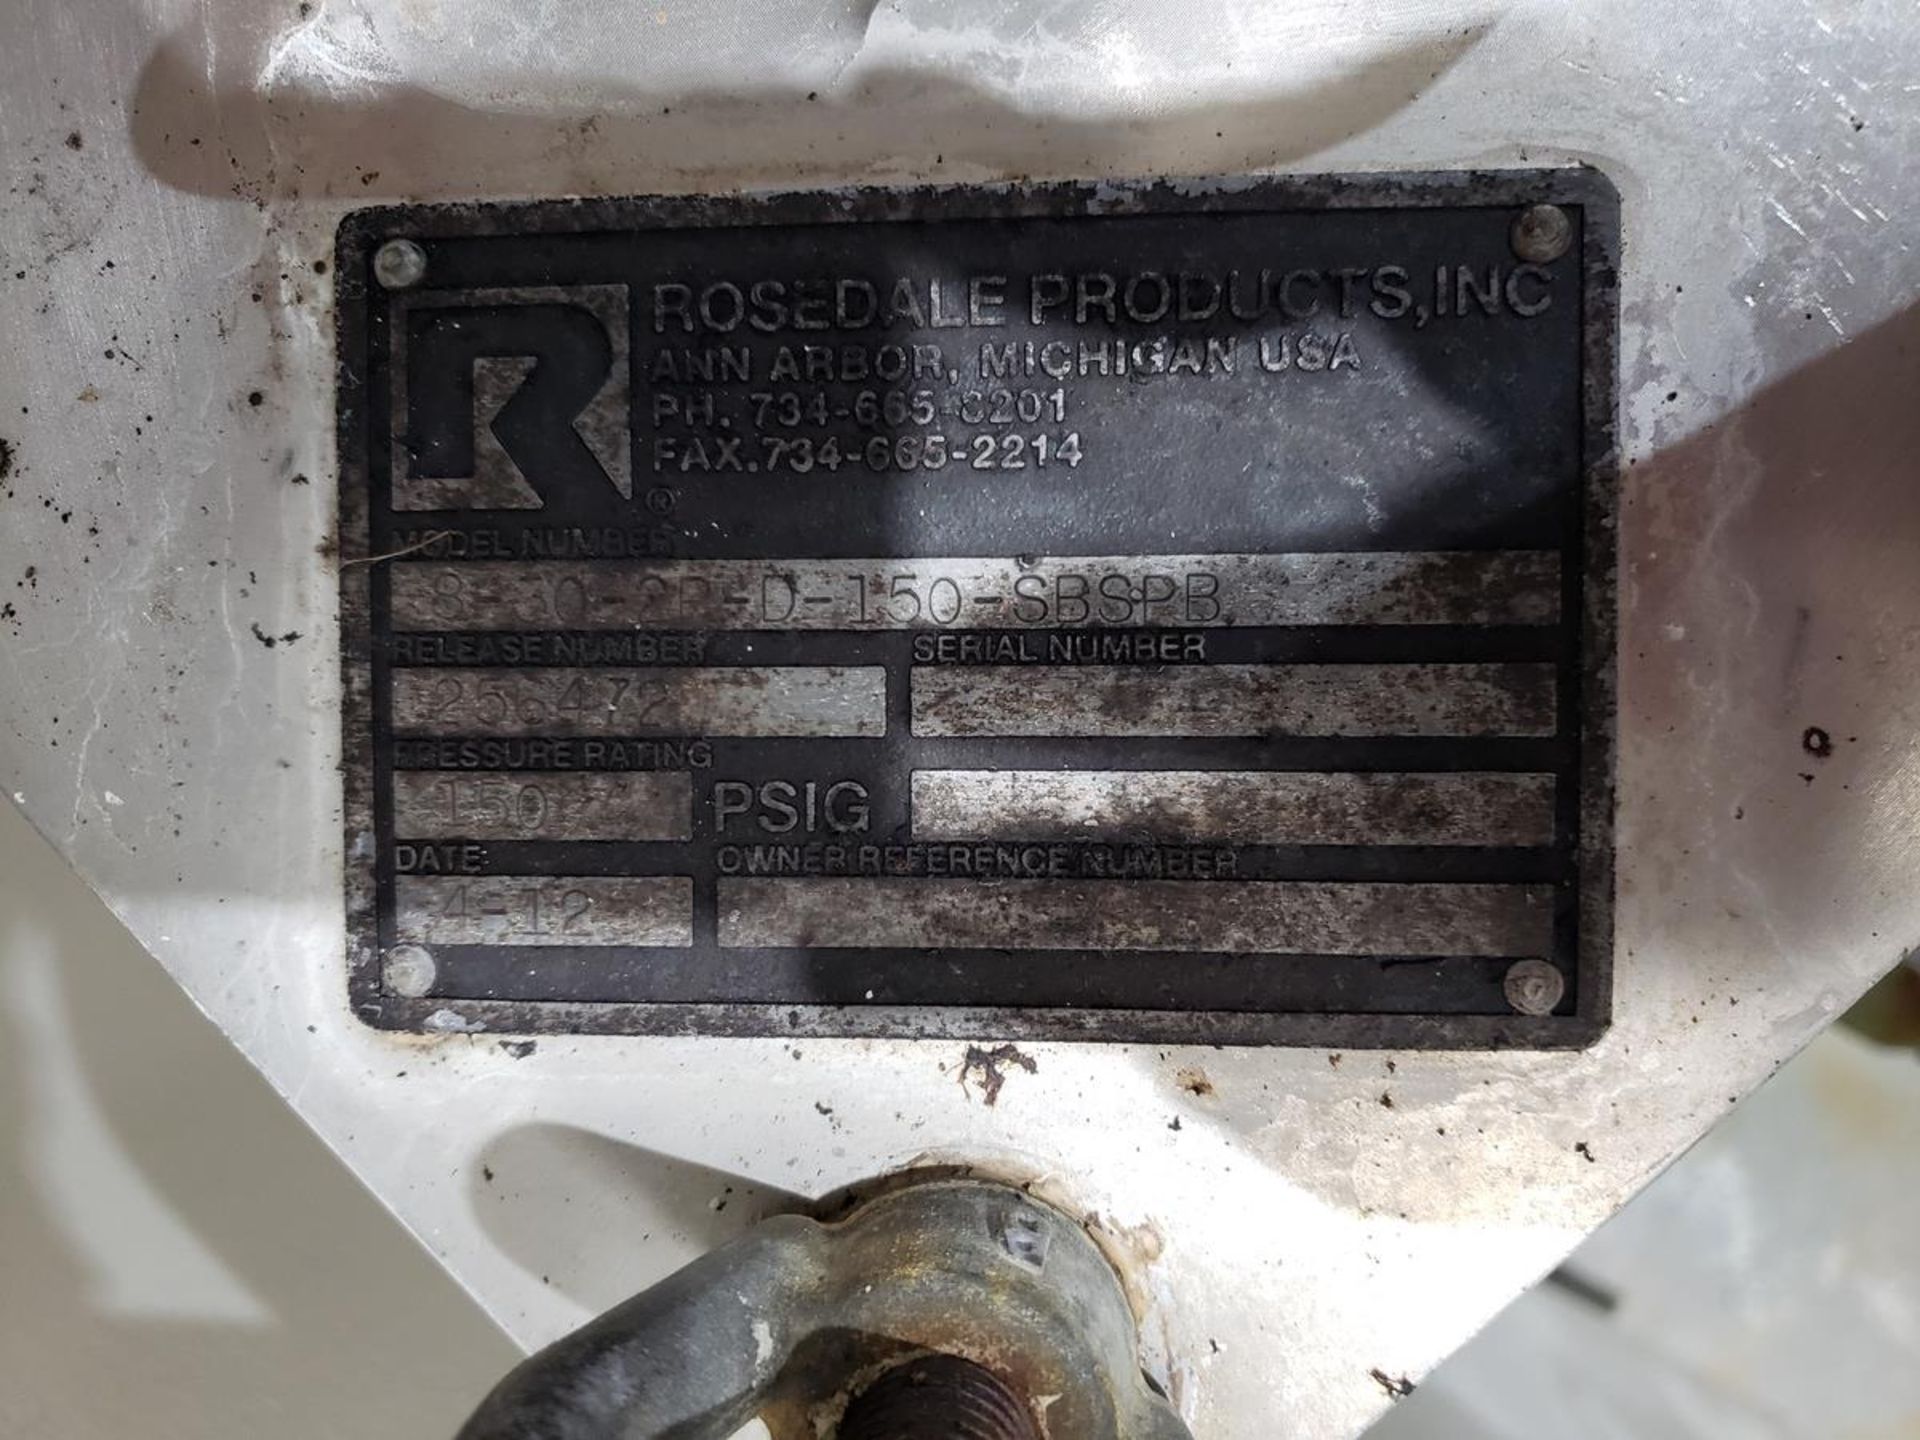 Rosedale Products Basket Strainer and Bag Filter, M# 8-30-2P-D-150-SBSPB, S/N 25S4 | Rig Fee: $35 - Image 3 of 3